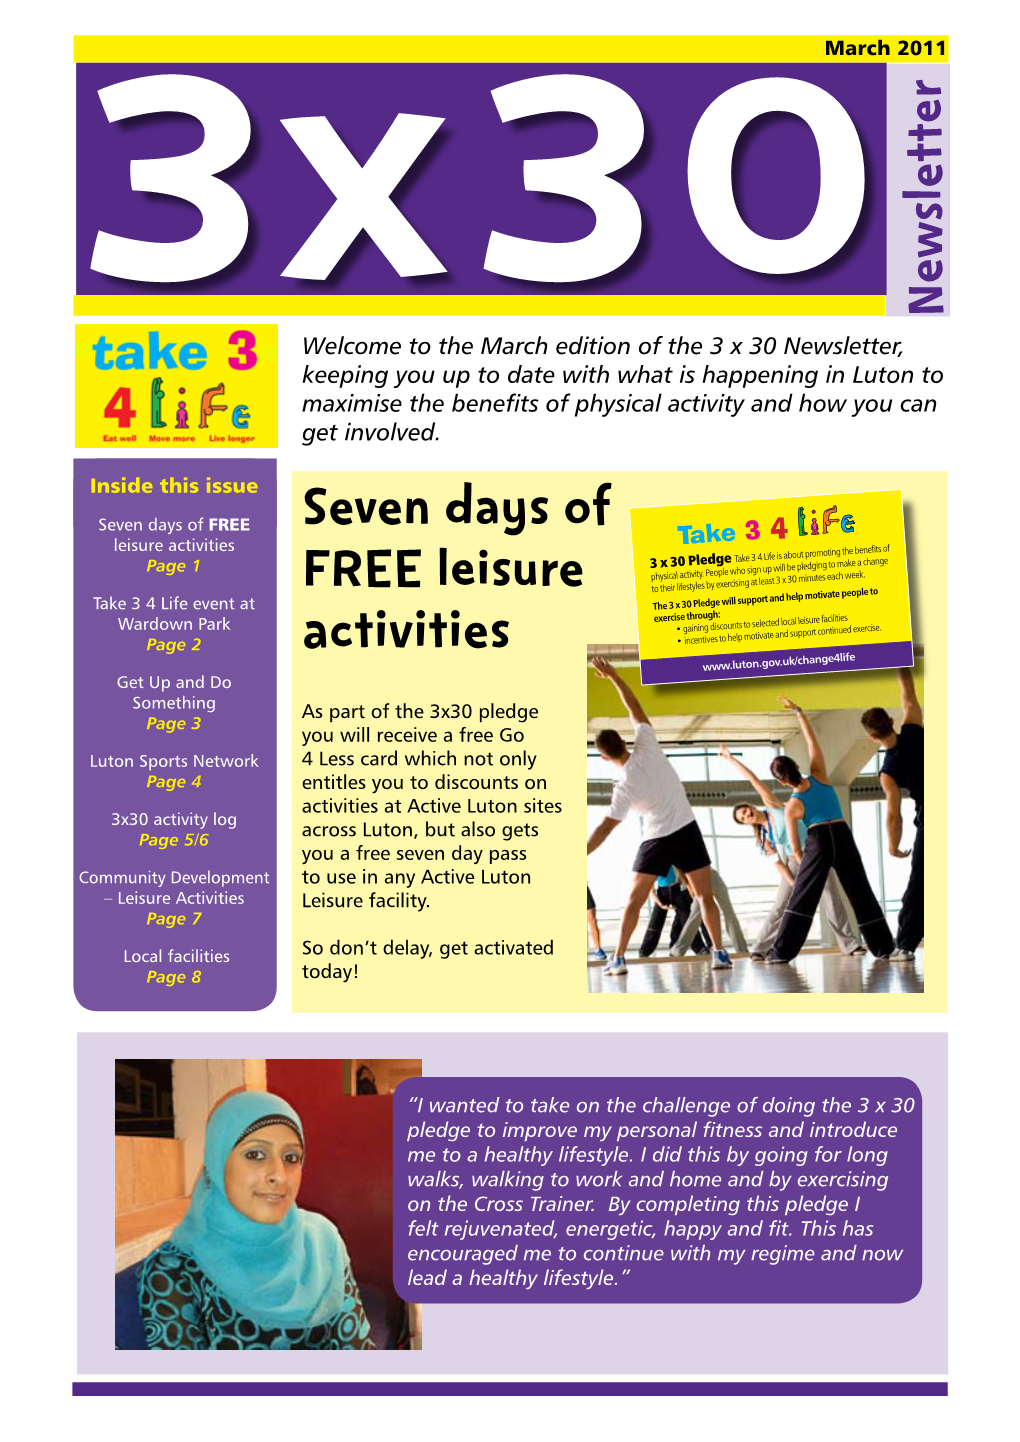 Seven Days of FREE Leisure Activities